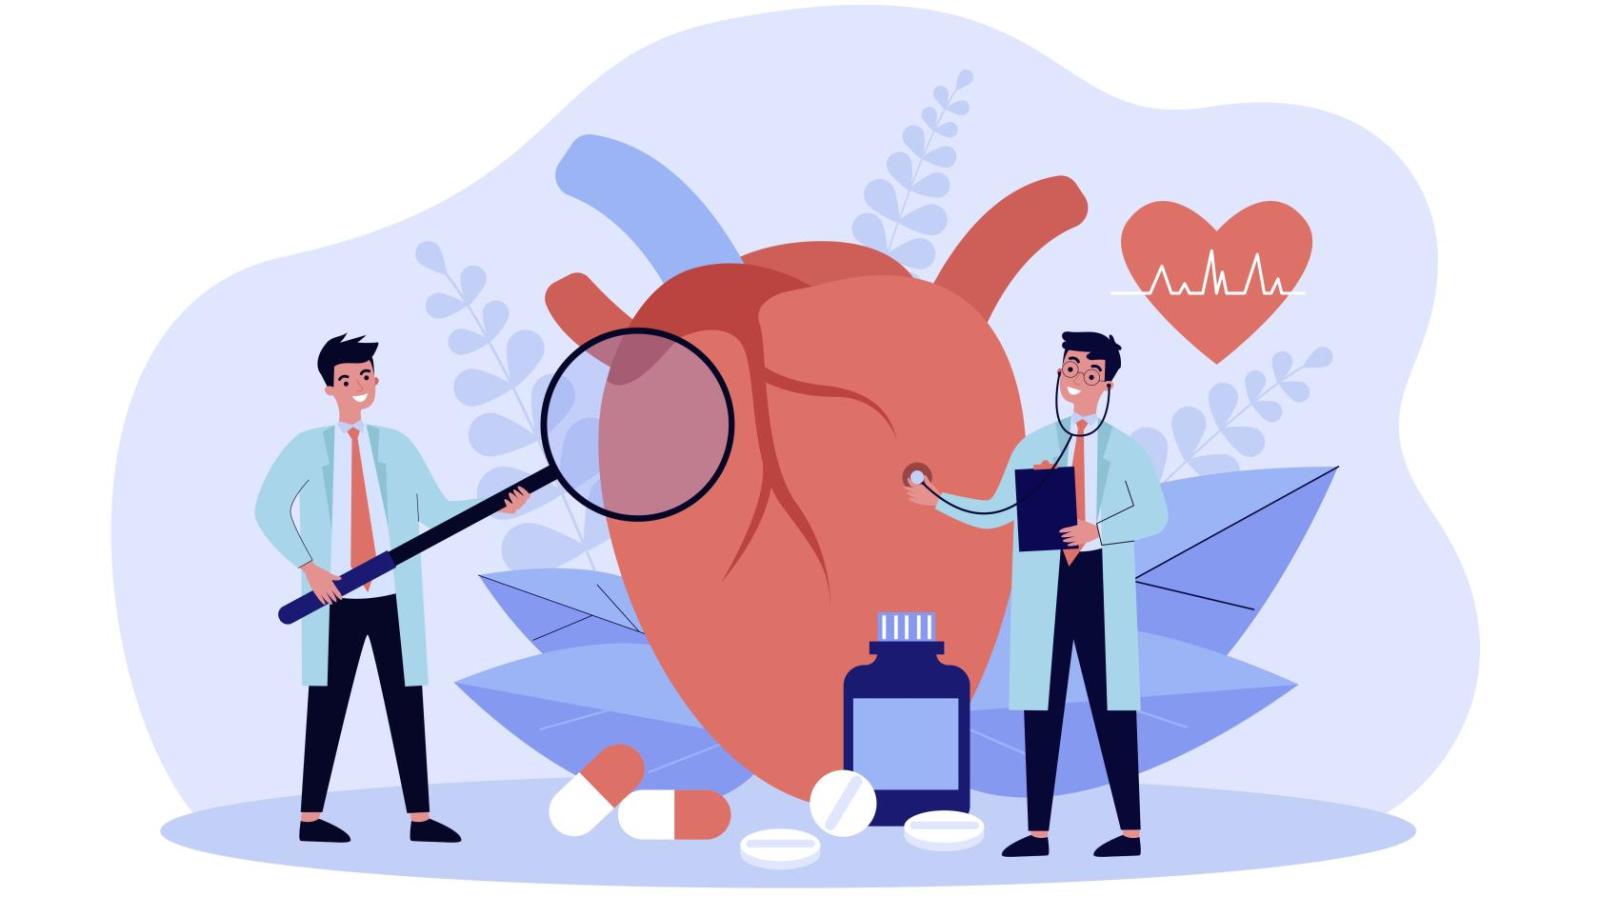 An illustration of doctors examining a heart